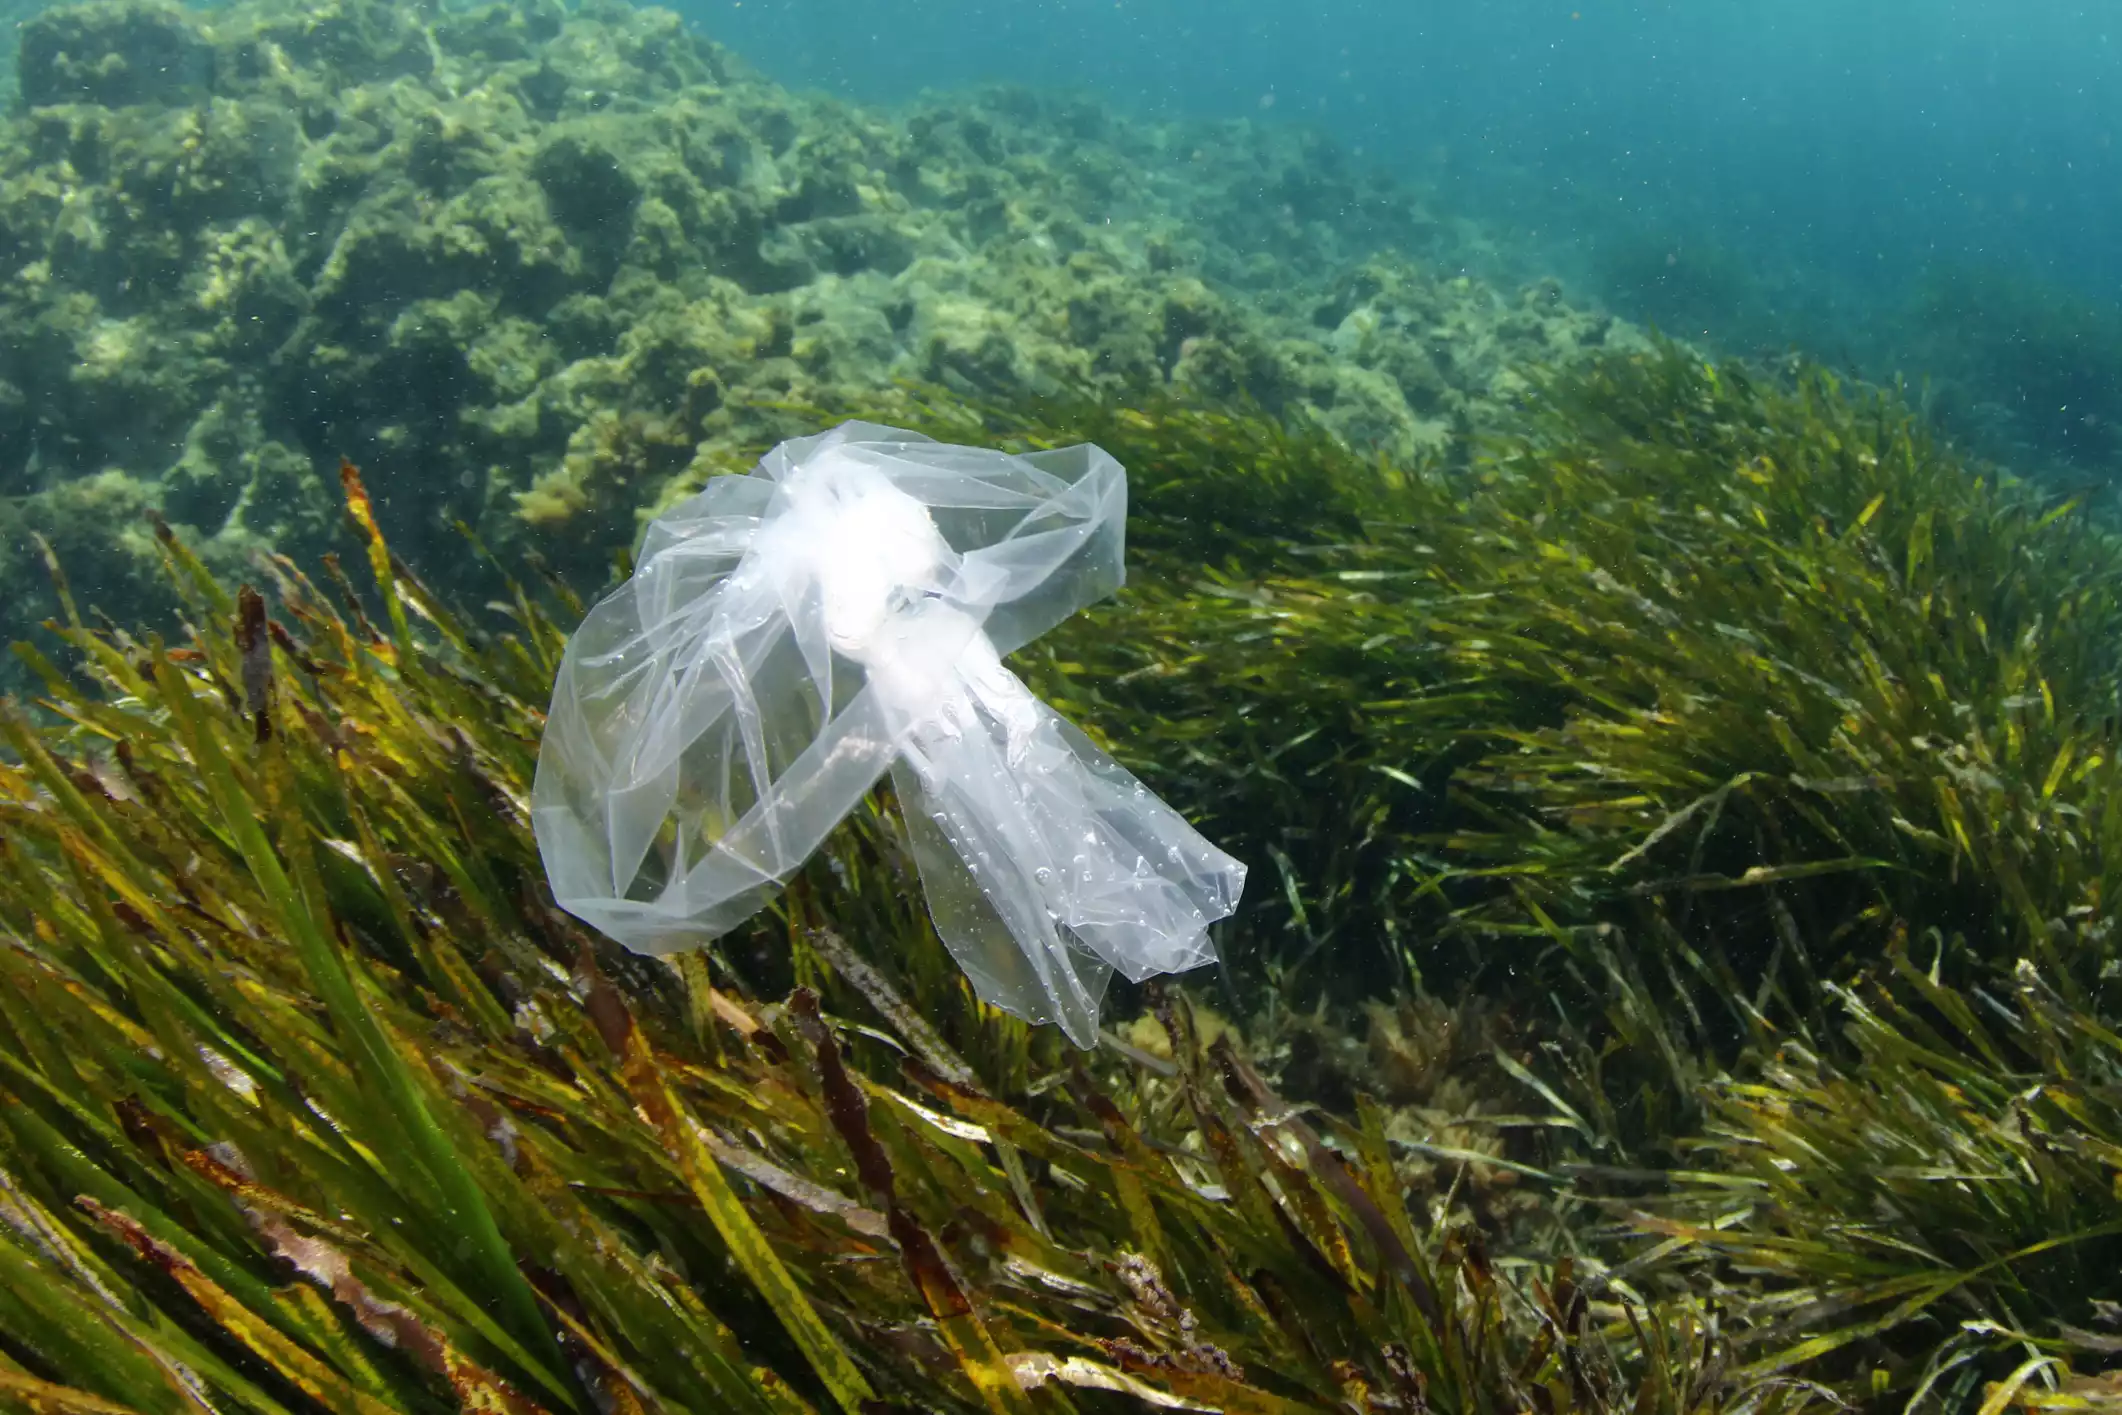 Plastic bag at sea. These can be dangerous to sea turtles who mistake them for food, such as jellyfish.